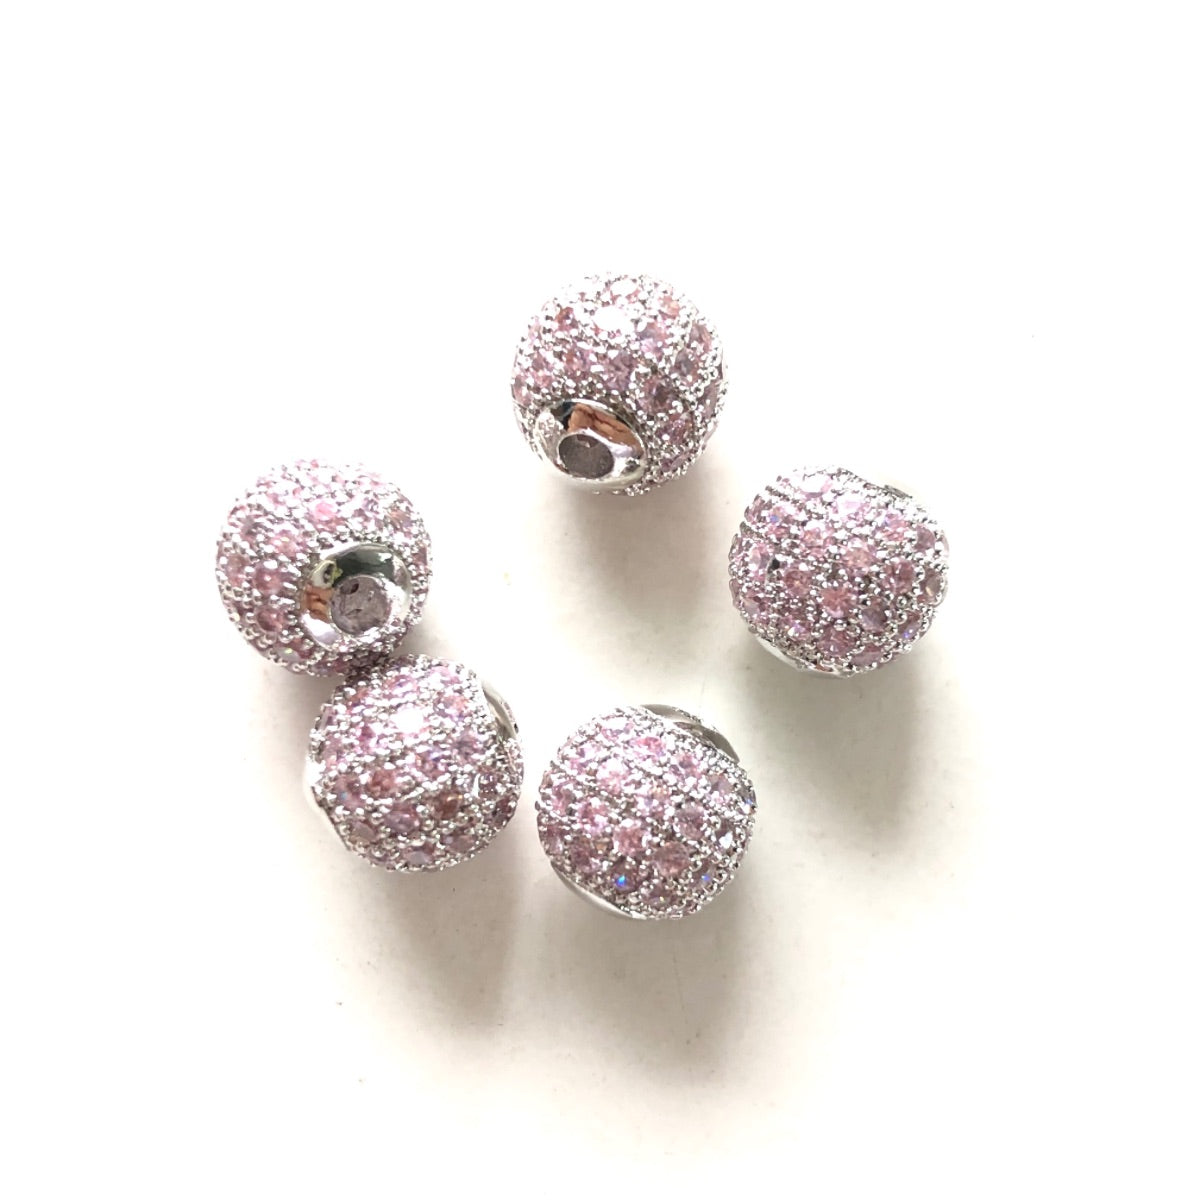 10pcs/lot 6mm, 8mm Colorful CZ Paved Ball Spacers Silver Pink CZ Paved Spacers 6mm Beads 8mm Beads Ball Beads Colorful Zirconia New Spacers Arrivals Charms Beads Beyond